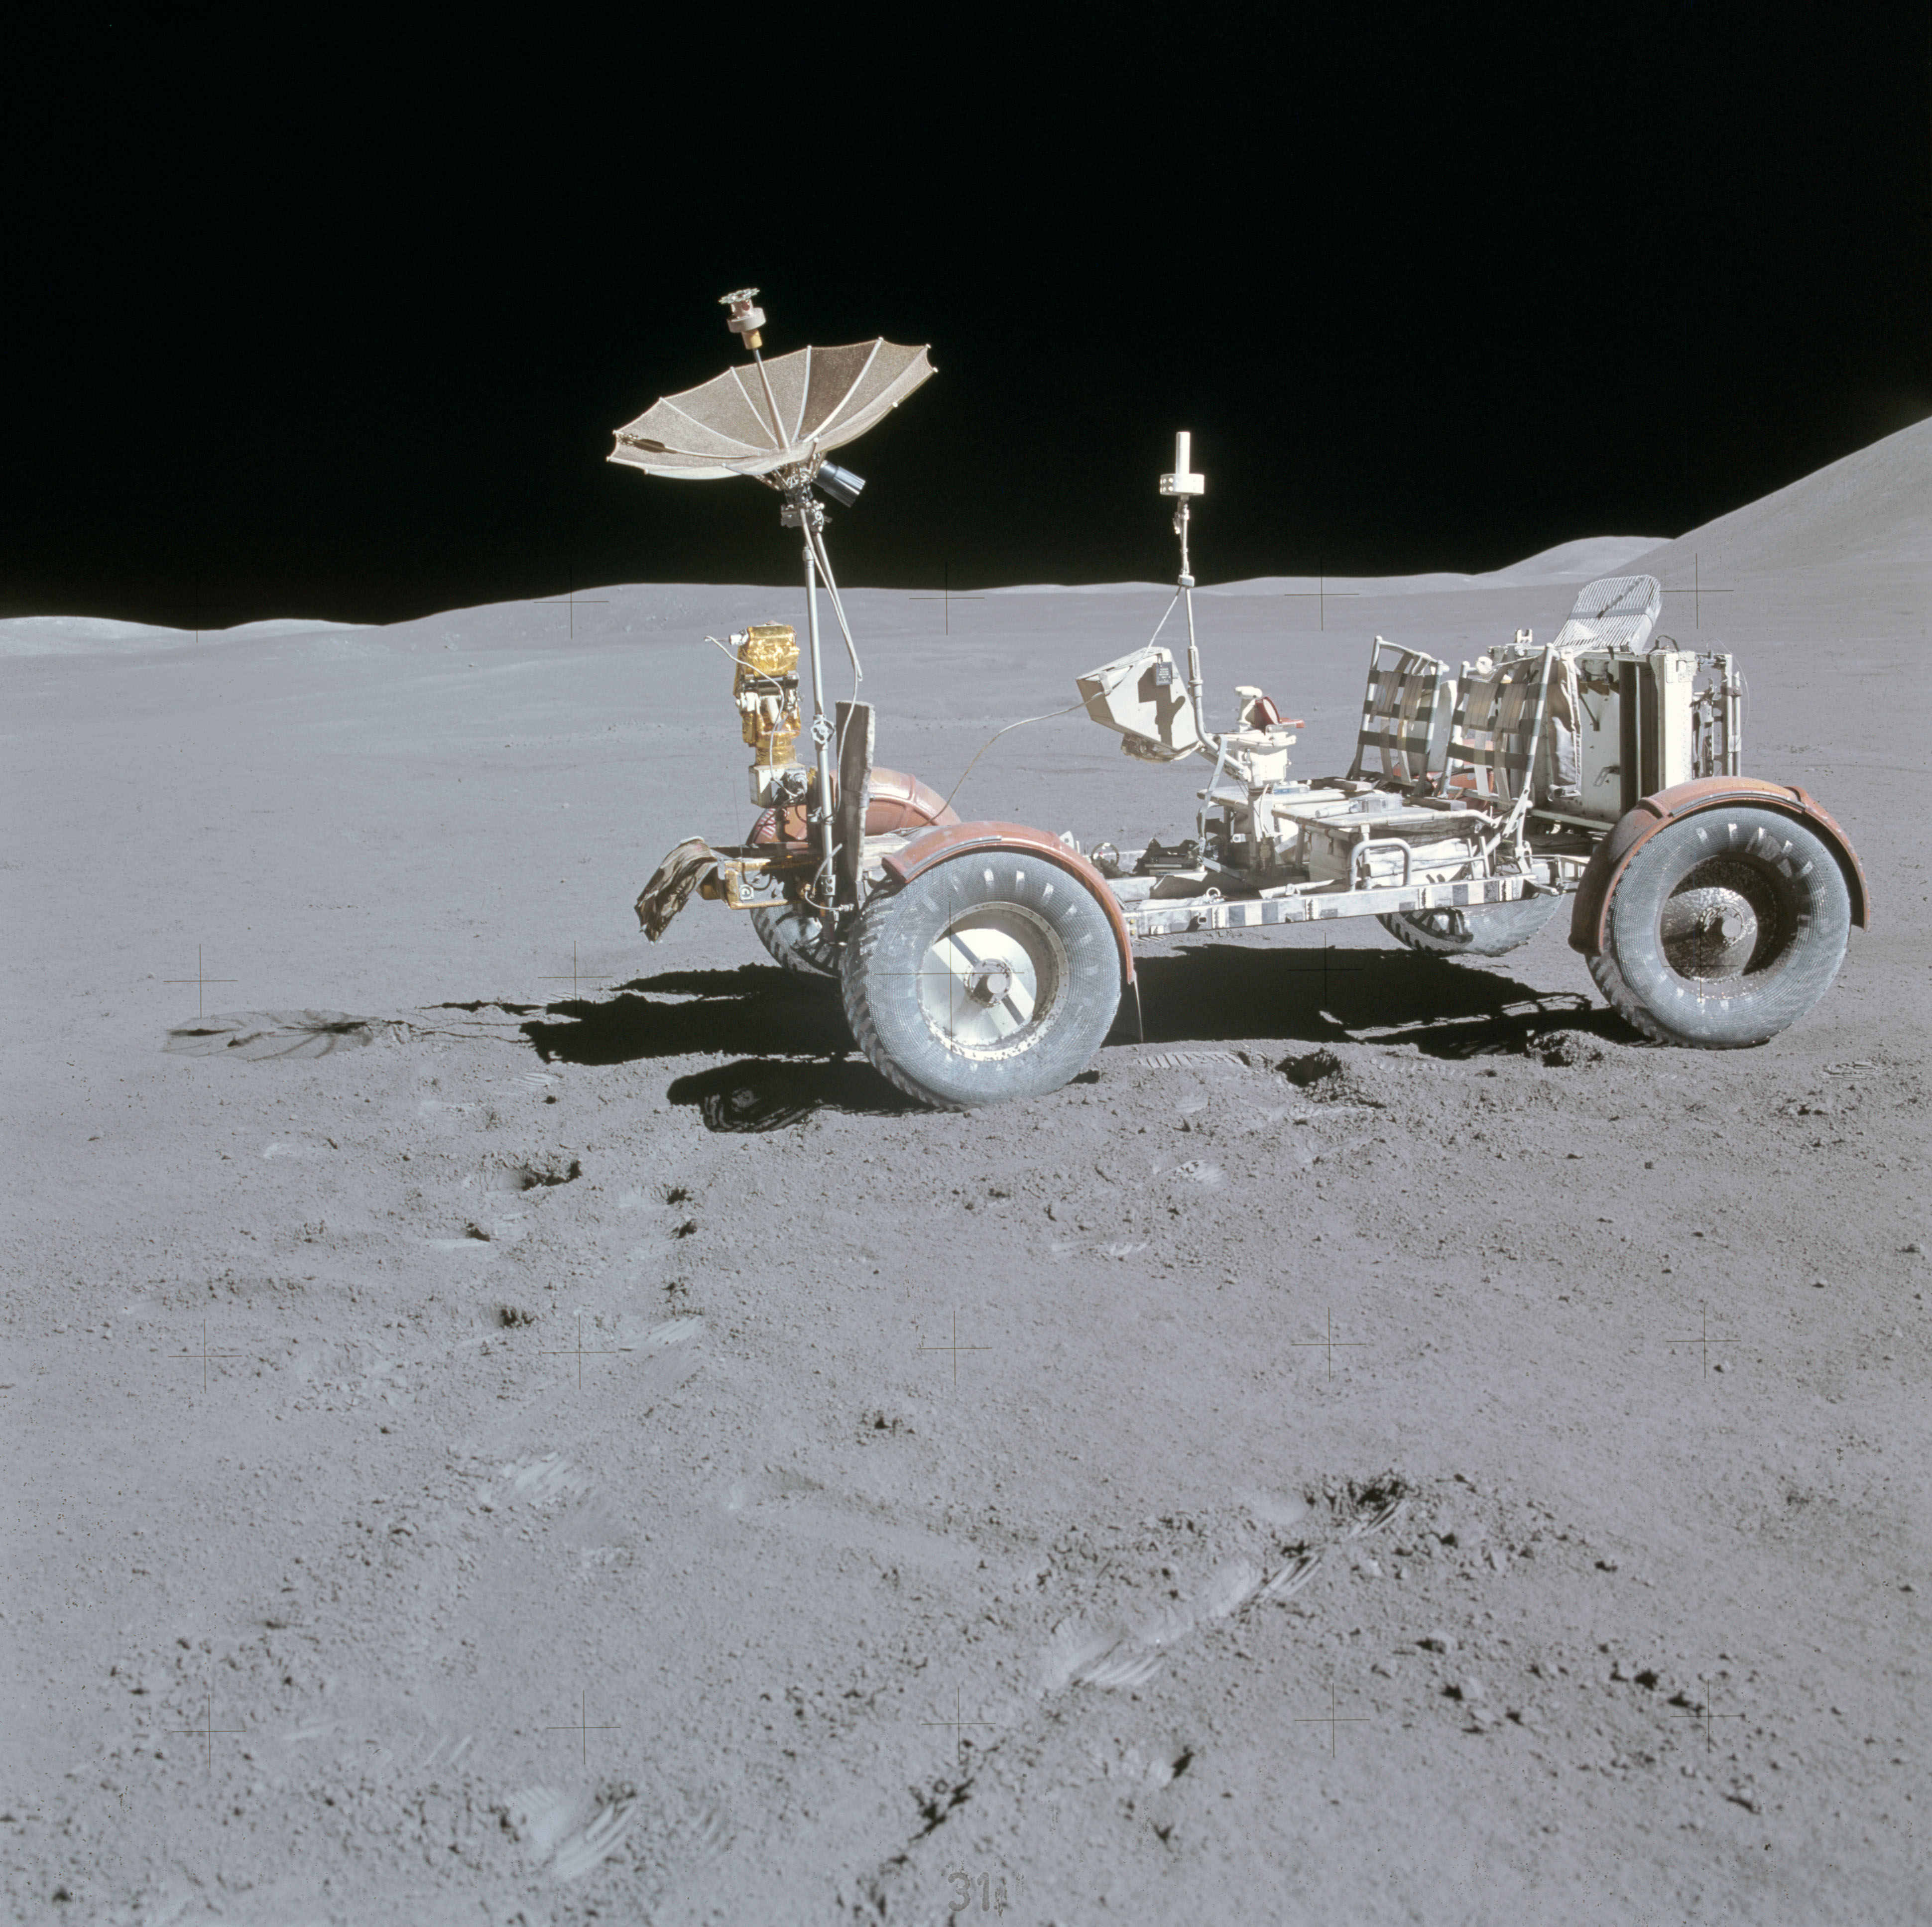 Photograph of the lunar roving vehicle (LRV) from Apollo 15, August 197